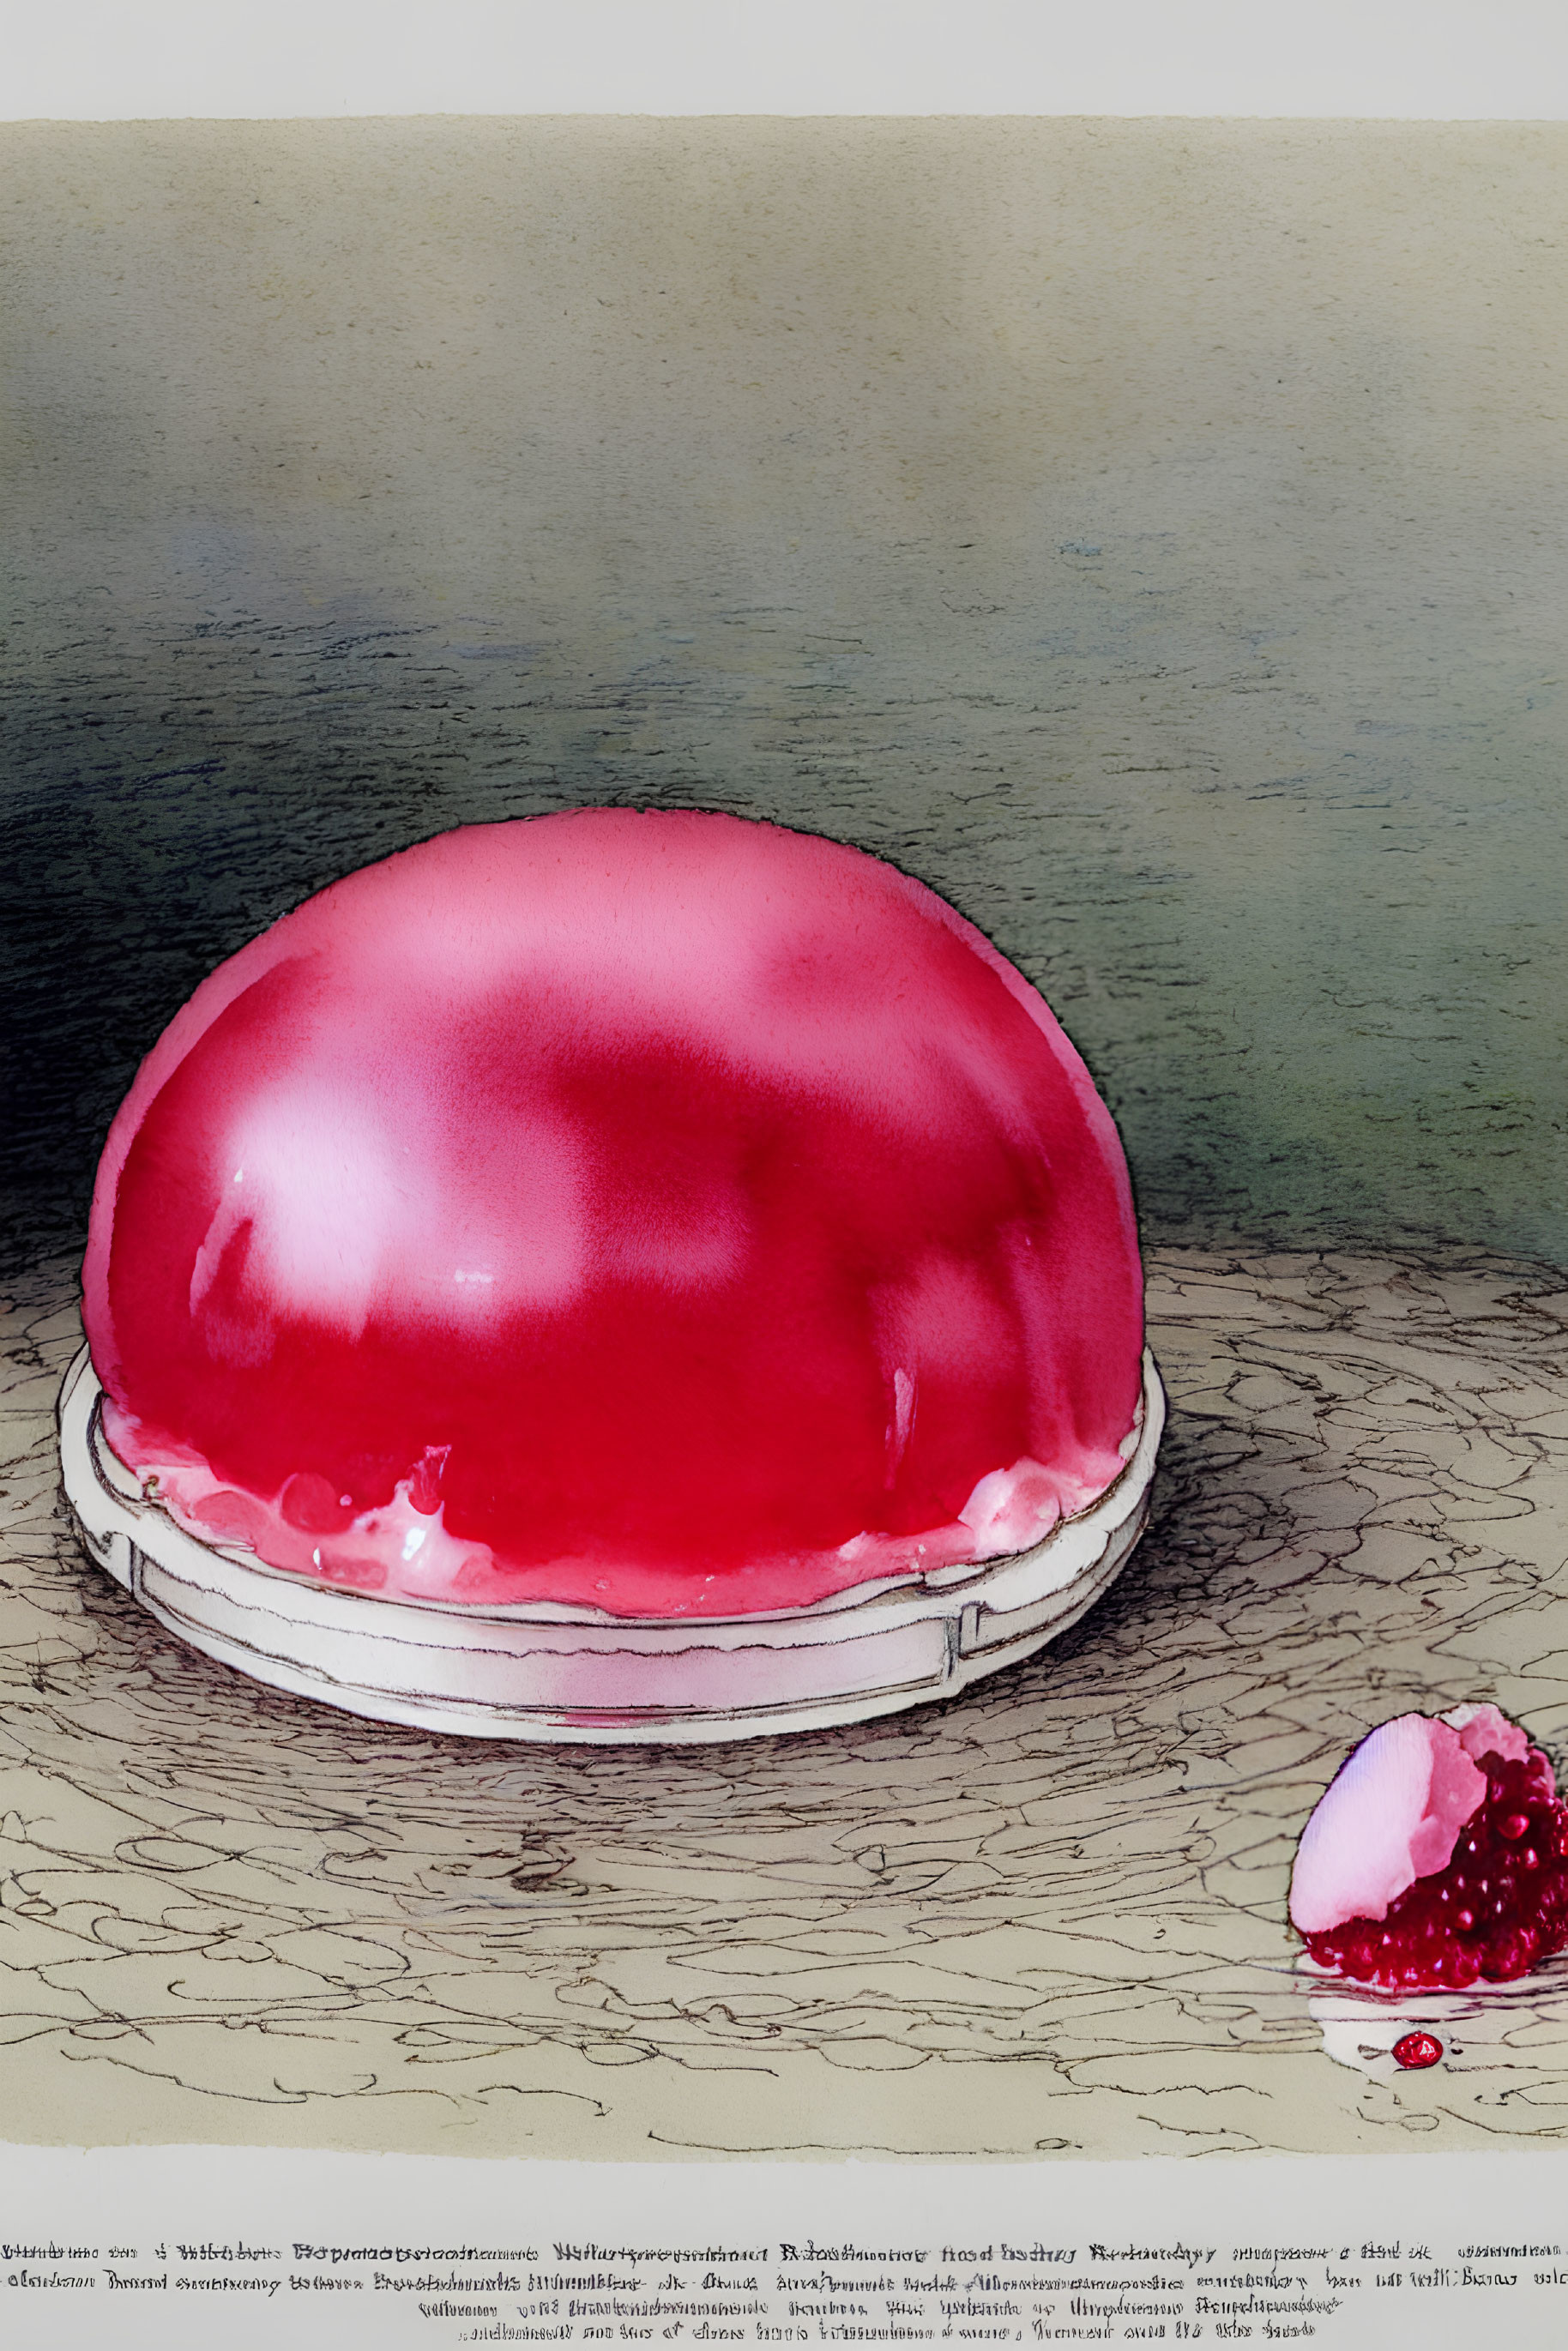 Red jelly dessert on white plate with scoop out, glistening surface.